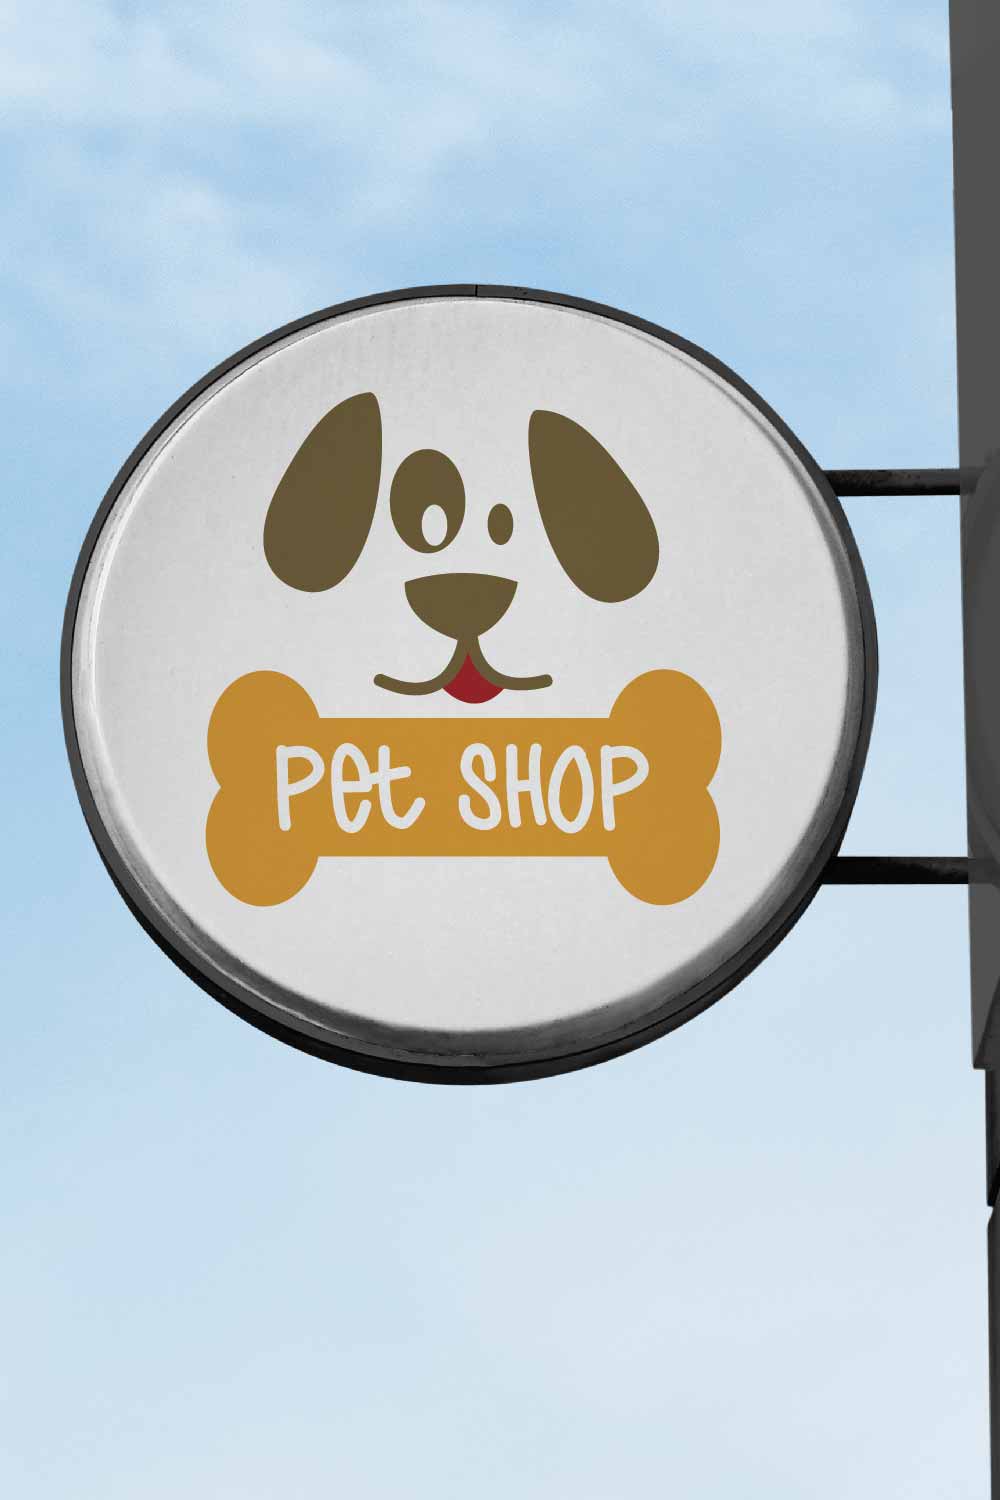 Dog and bone logo for petshop or veterinary pinterest preview image.